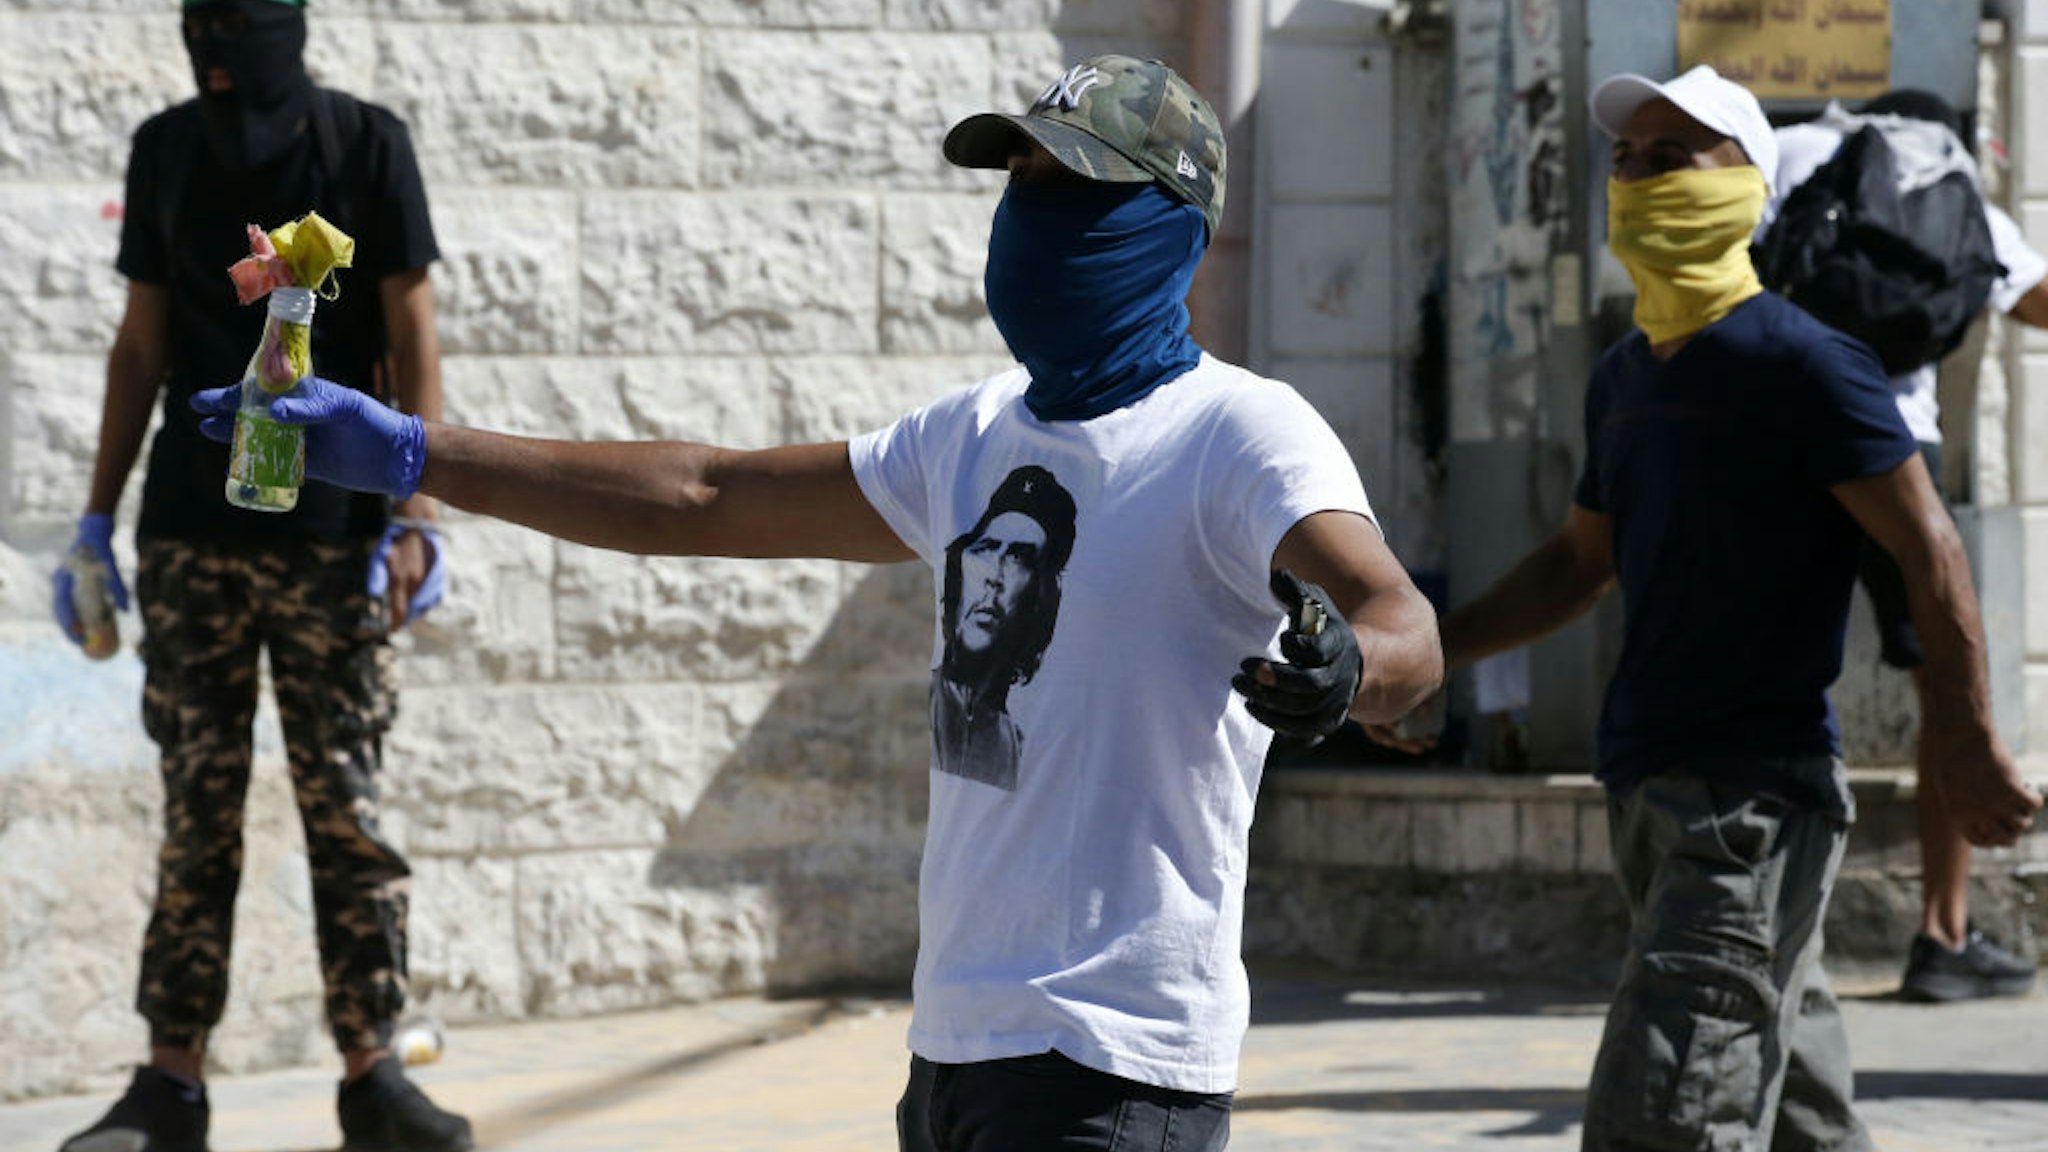 Masked Palestinian protesters throw molotov cocktails at Israeli security forces amidst clashes following Friday prayers in the Jerusalem Arab neighbourhood of Issawiya on June 28, 2019, after a Palestinian demonstrator died from injuries sustained the previous day.